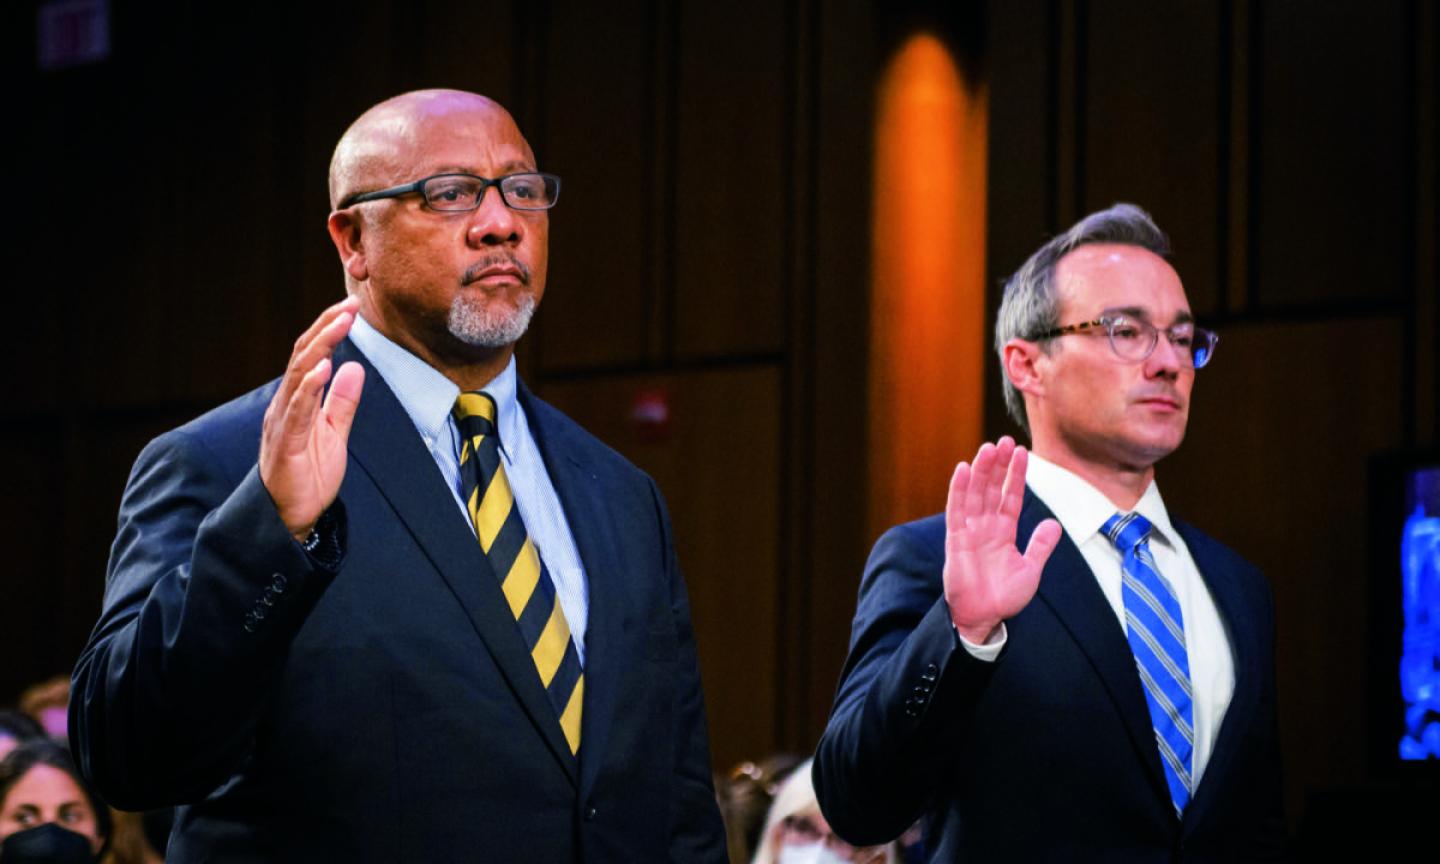 Philip Smith, founder and president of the national African American Gun Association, left, and Duke Law professor Joseph Blocher are sworn in during a Senate Judiciary Committee hearing to examine the Highland Park attack.